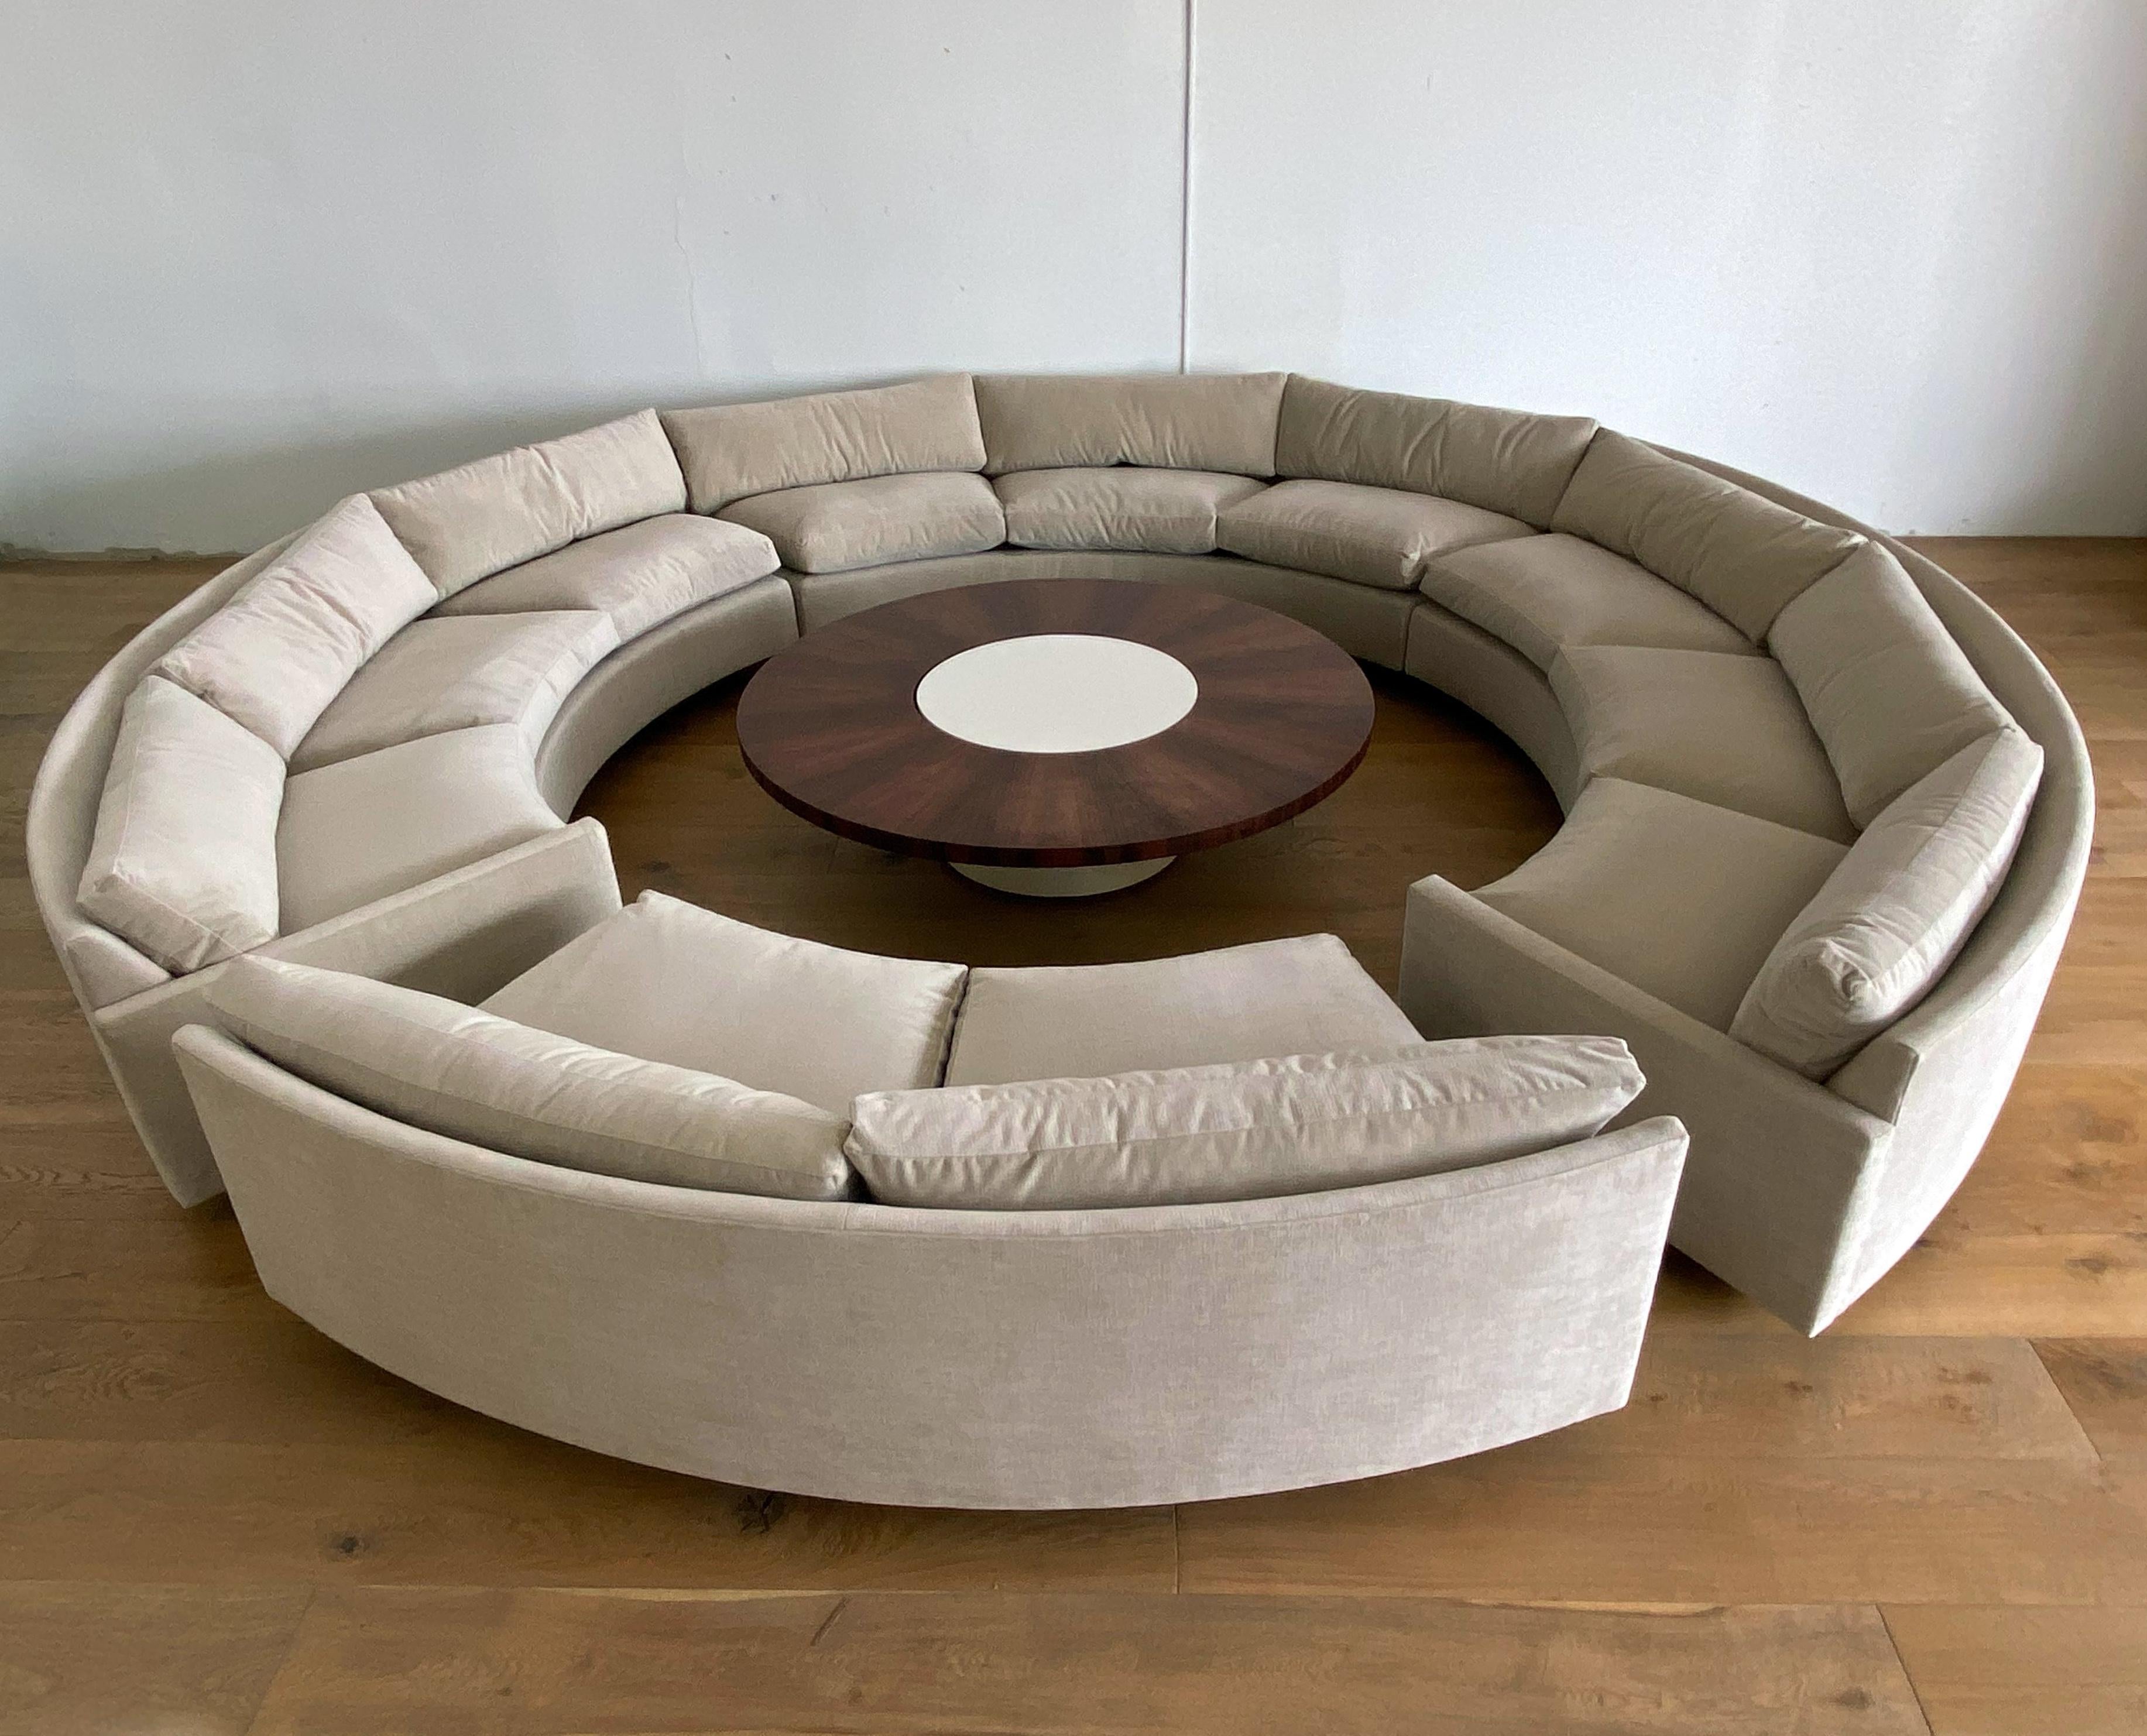 This circular sofa is the most complete Milo Baughman circular sofa I've ever seen. Upholstered in a neutral light tan velvet, this rosewood plinth sofa is not only beautiful, it's ridiculously comfortable, and has room for you and 15 of your